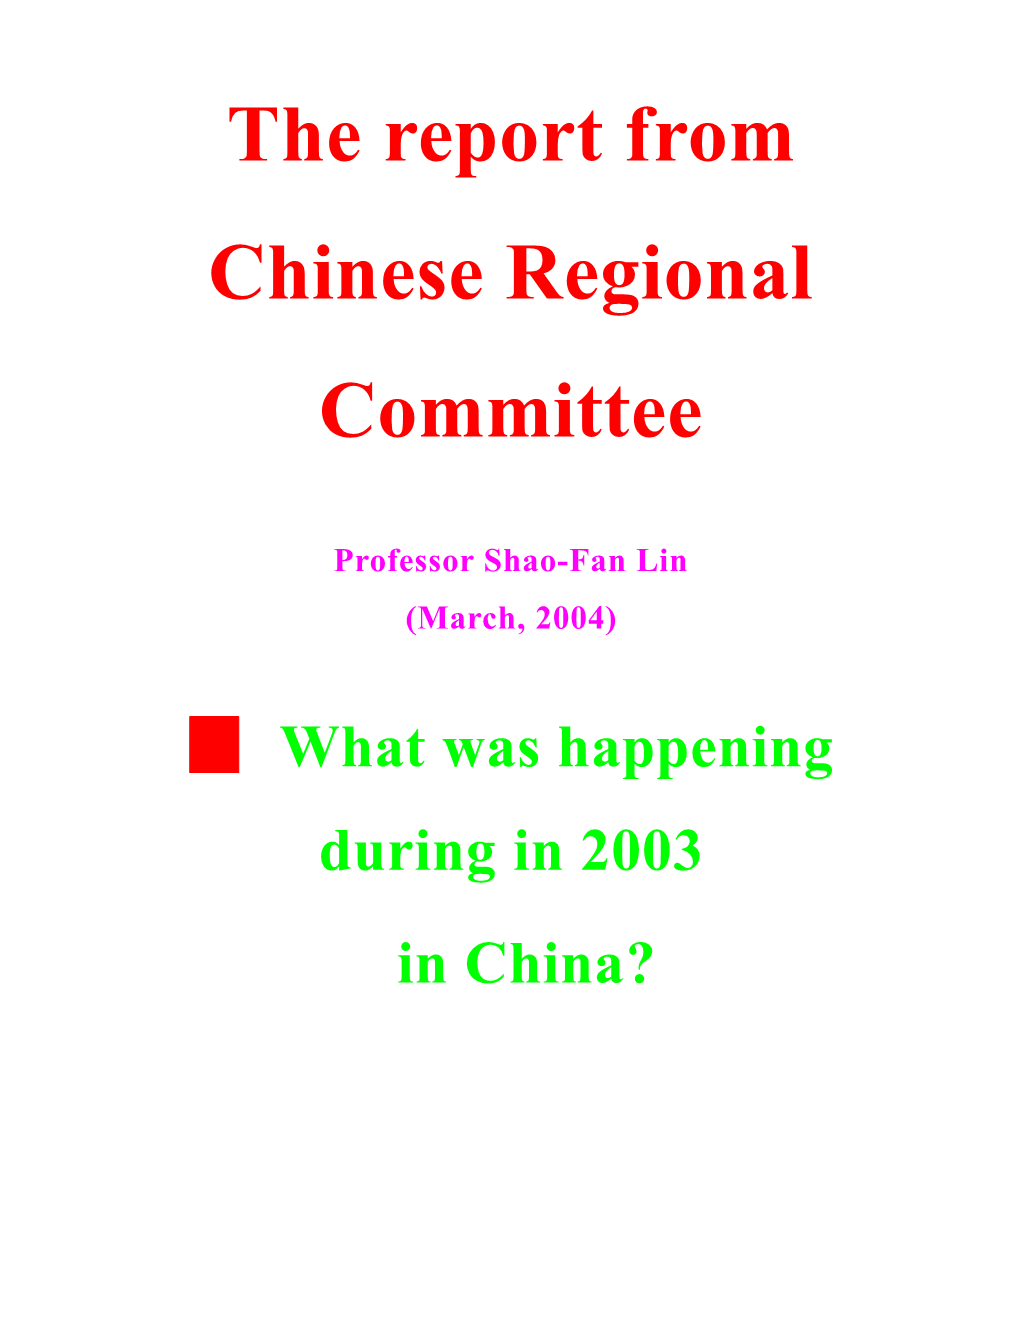 The Report from Chinese Regional Committee